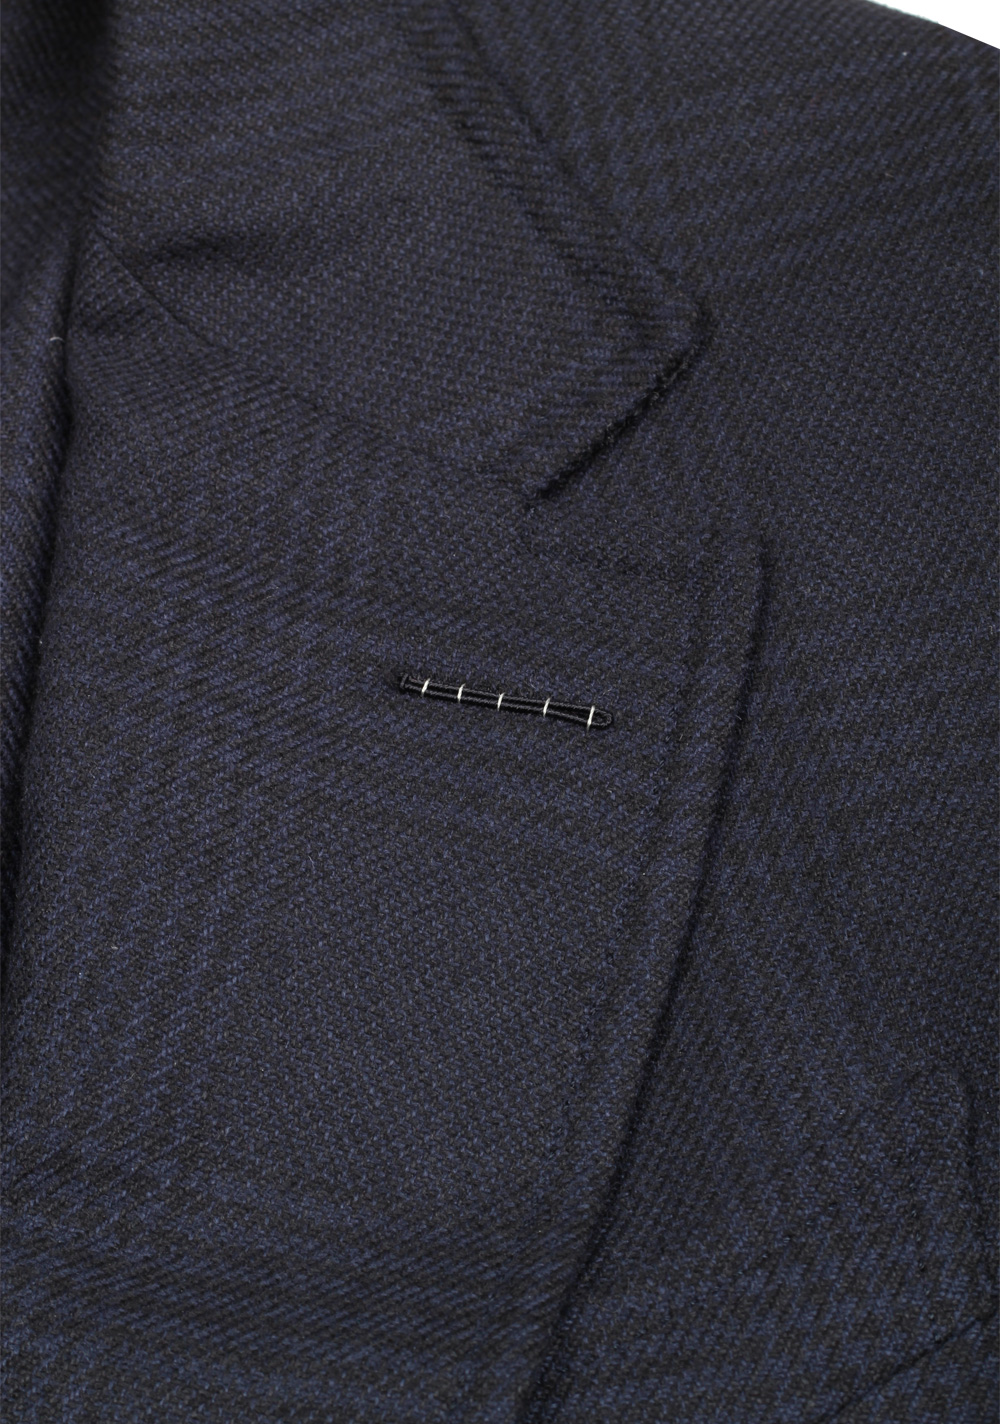 TOM FORD Shelton Checked Blue Sport Coat Size 48 / 38R U.S. In Silk Cashmere | Costume Limité